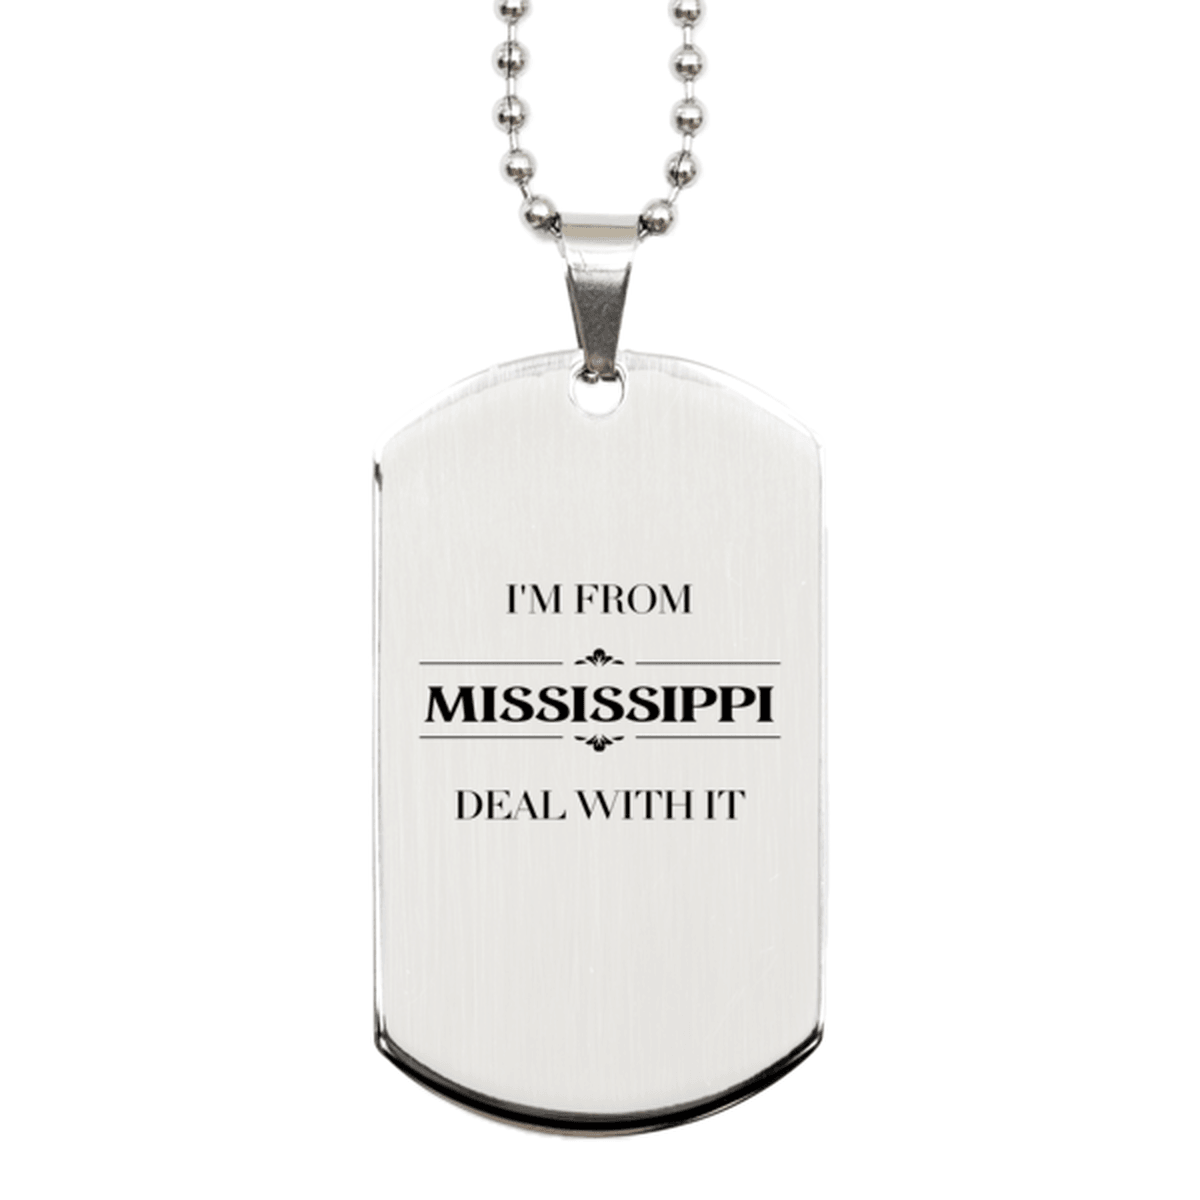 I'm from Mississippi, Deal with it, Proud Mississippi State Gifts, Mississippi Silver Dog Tag Gift Idea, Christmas Gifts for Mississippi People, Coworkers, Colleague - Mallard Moon Gift Shop